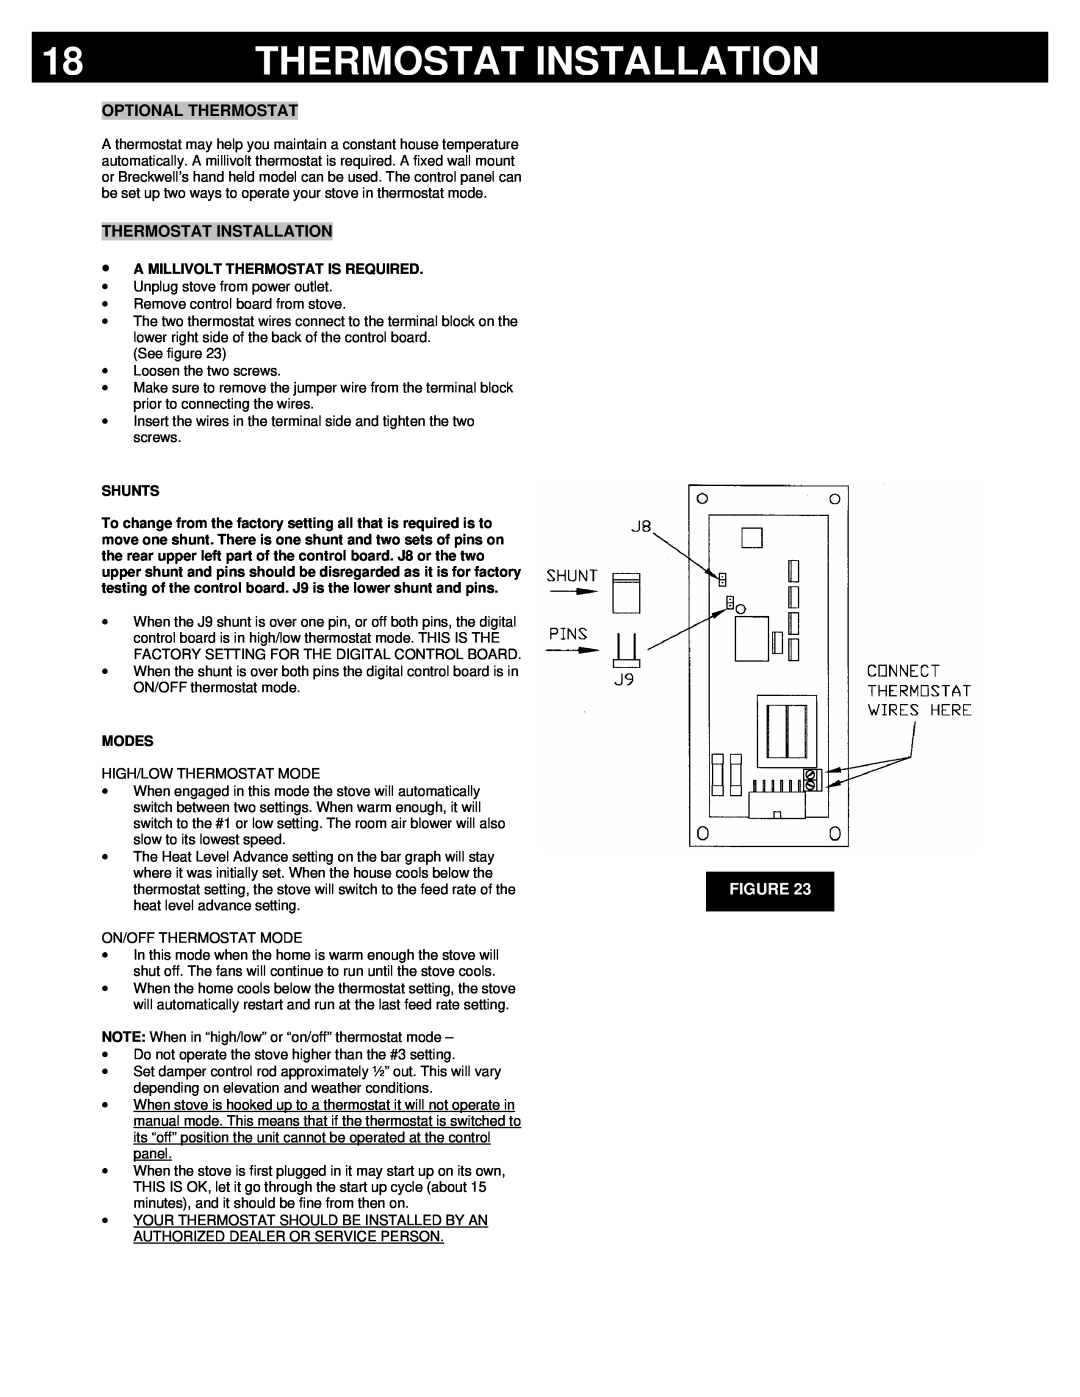 Breckwell P23I, P23FSA, P23FSL owner manual Thermostat Installation, ∙A Millivolt Thermostat Is Required, Shunts, Modes 